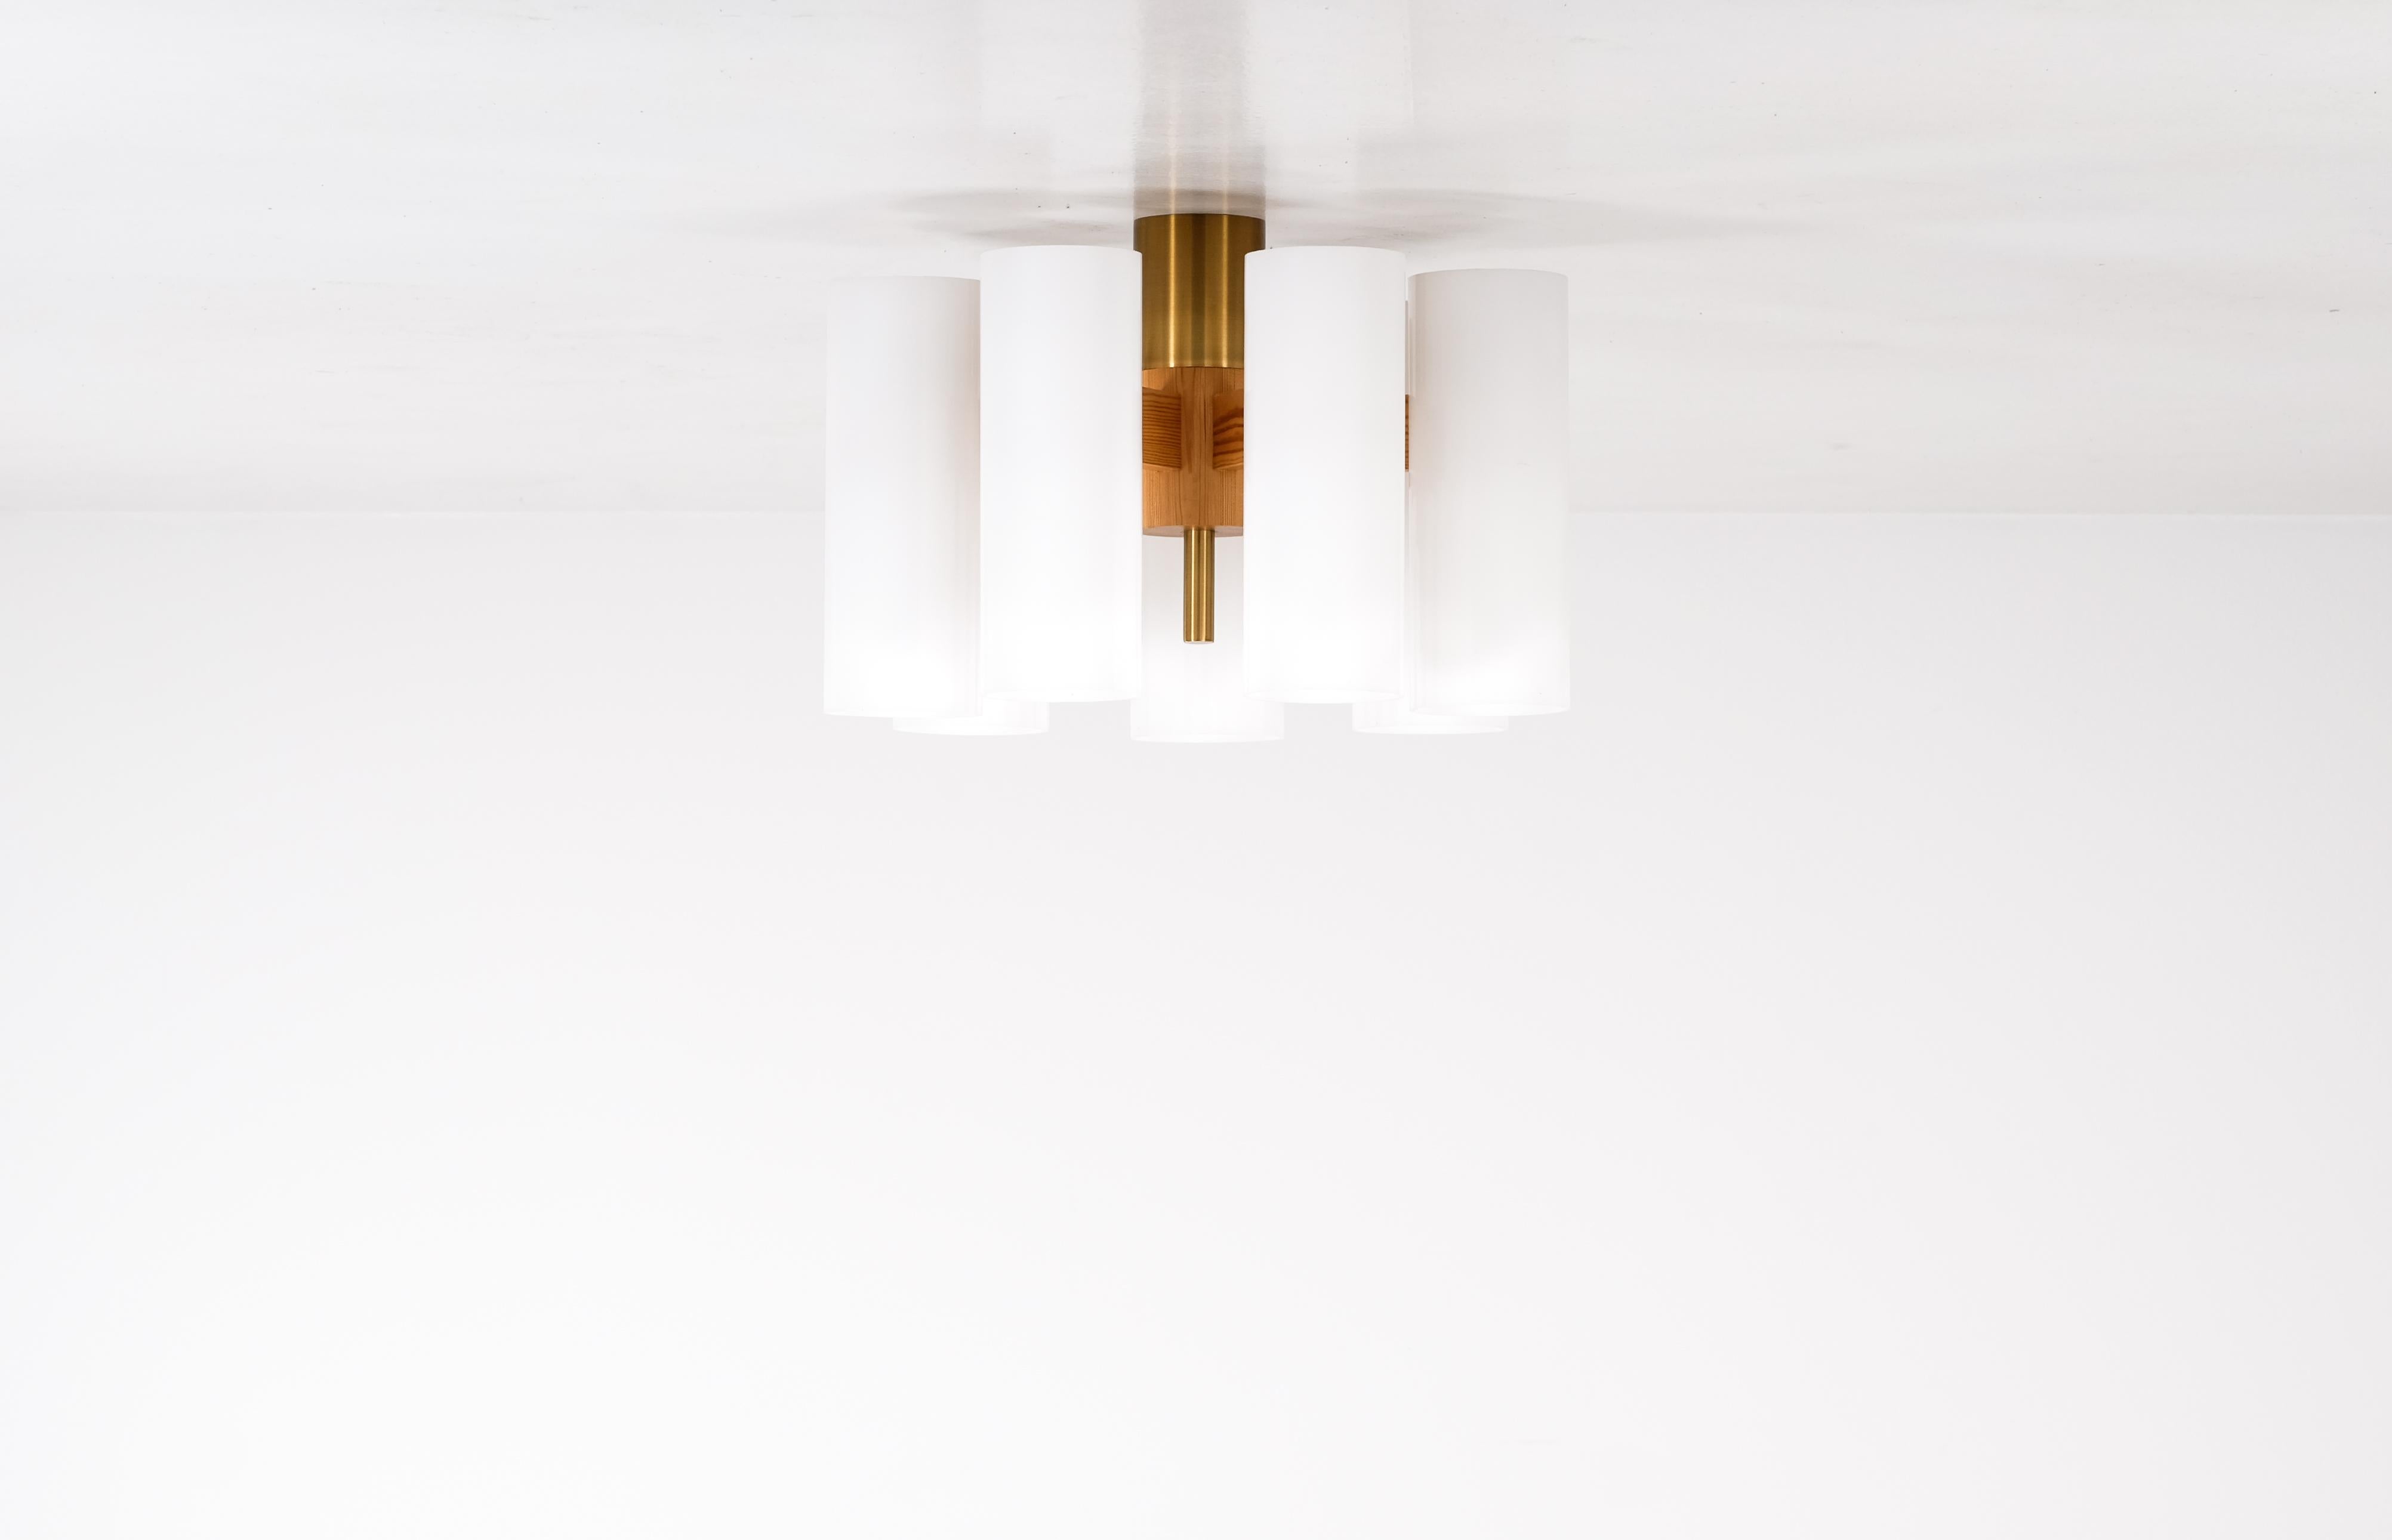 Set of 4 Luxus ceiling lamps by Uno & Östen Kristiansson, 1960s For Sale 2